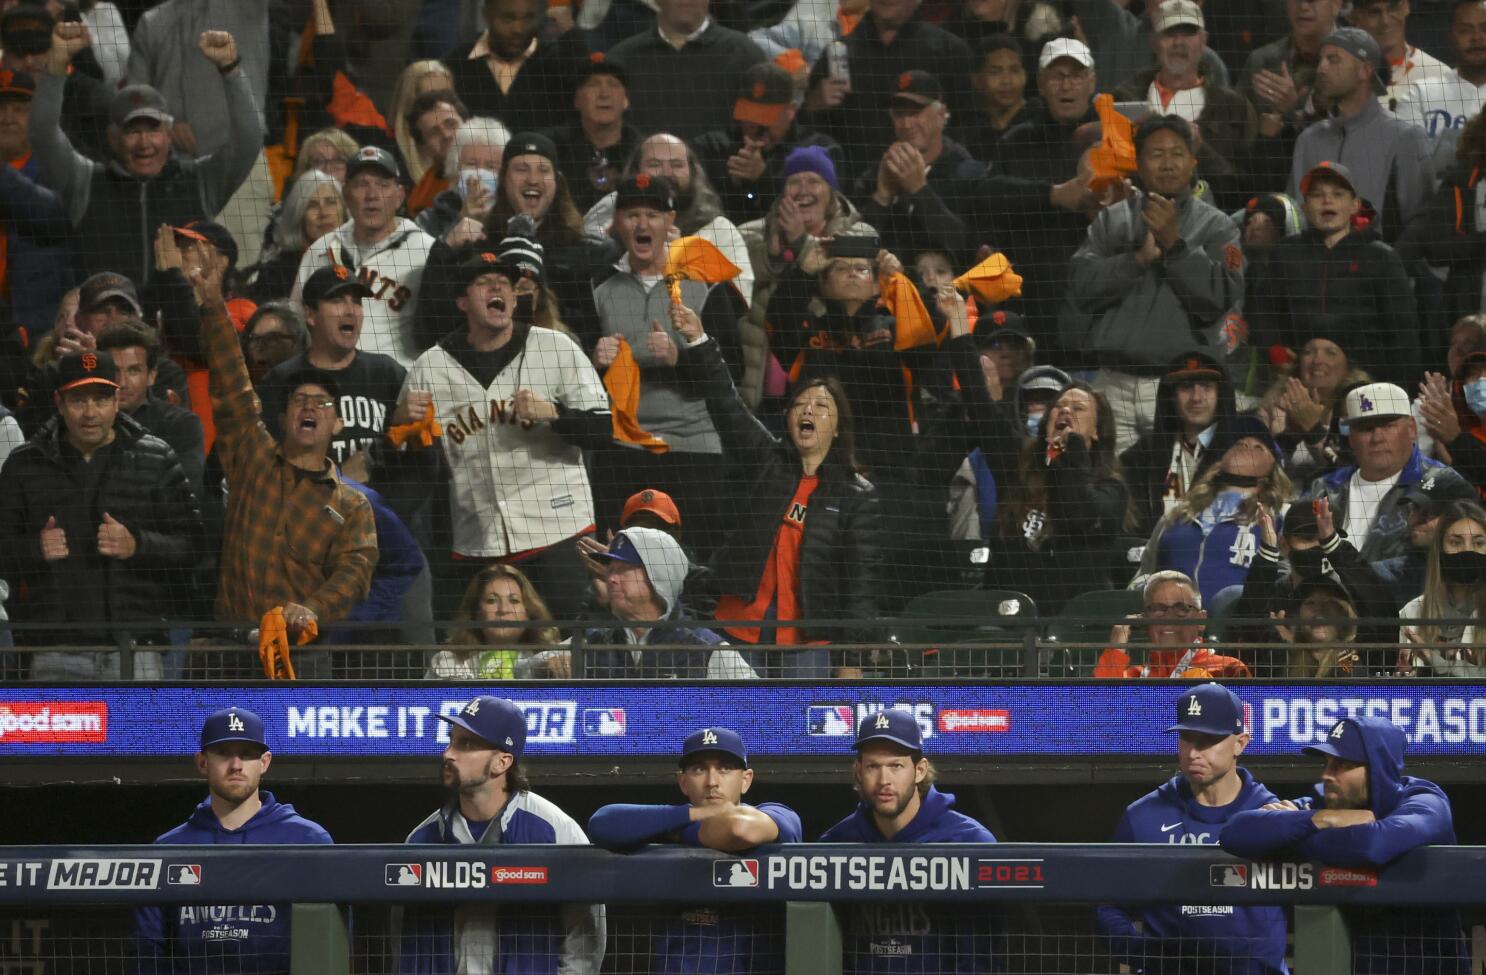 Giants and their fans win Game 1 of grudge match vs. Dodgers - Los